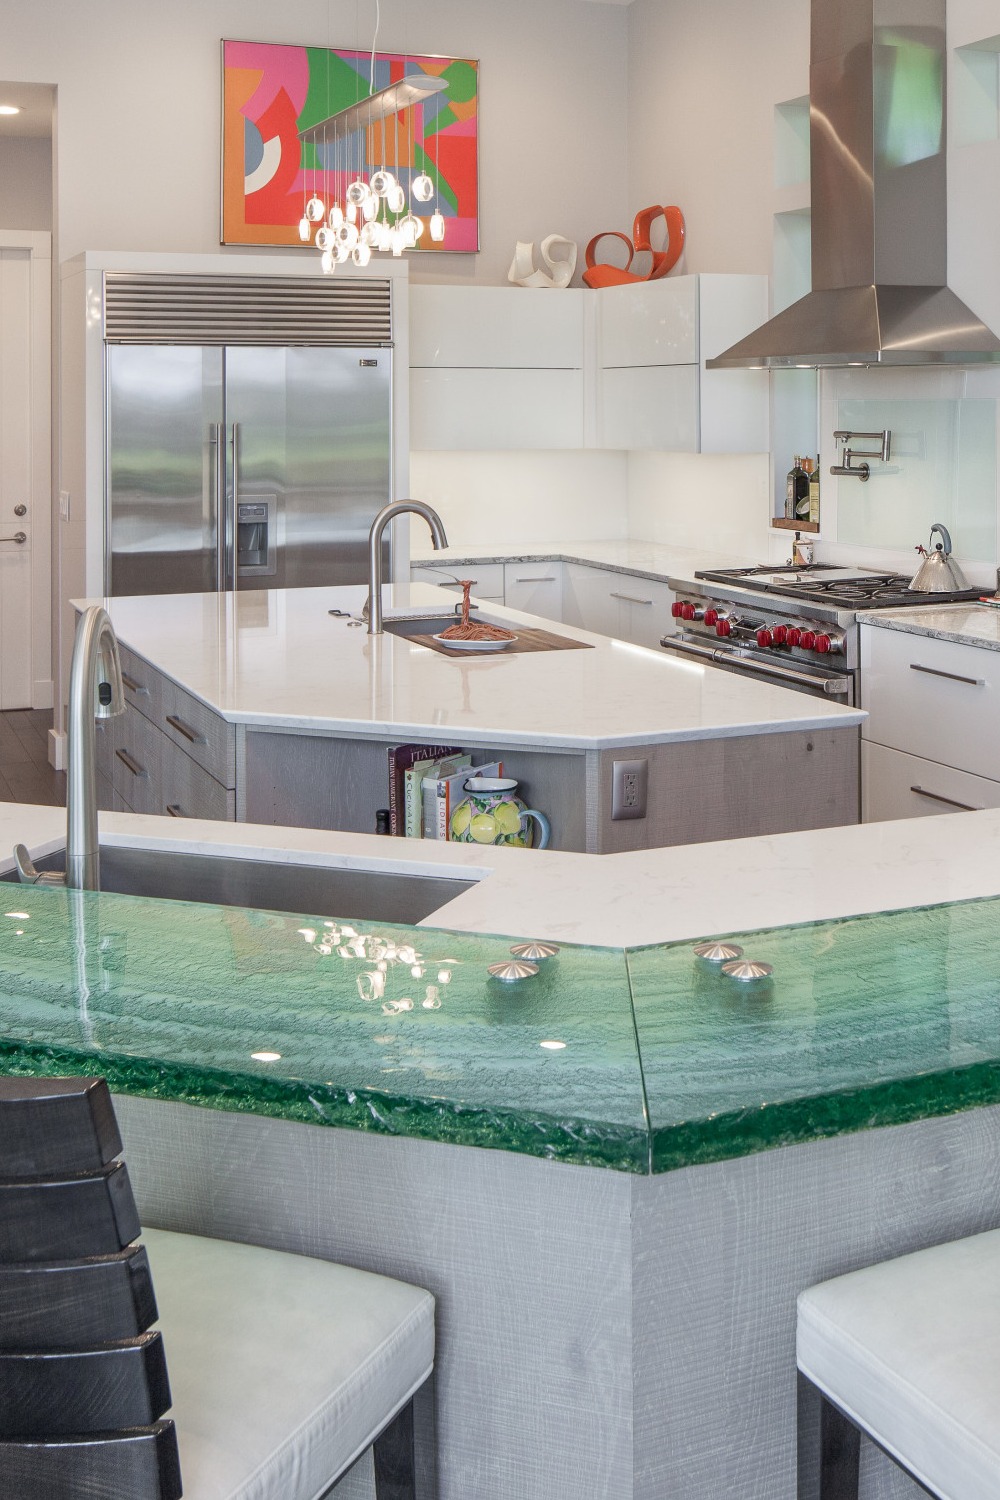 Recycled Glass Countertop Stainless Steel Appliances Recycled Glass Countertops Crushed Glass Kitchen Countertops